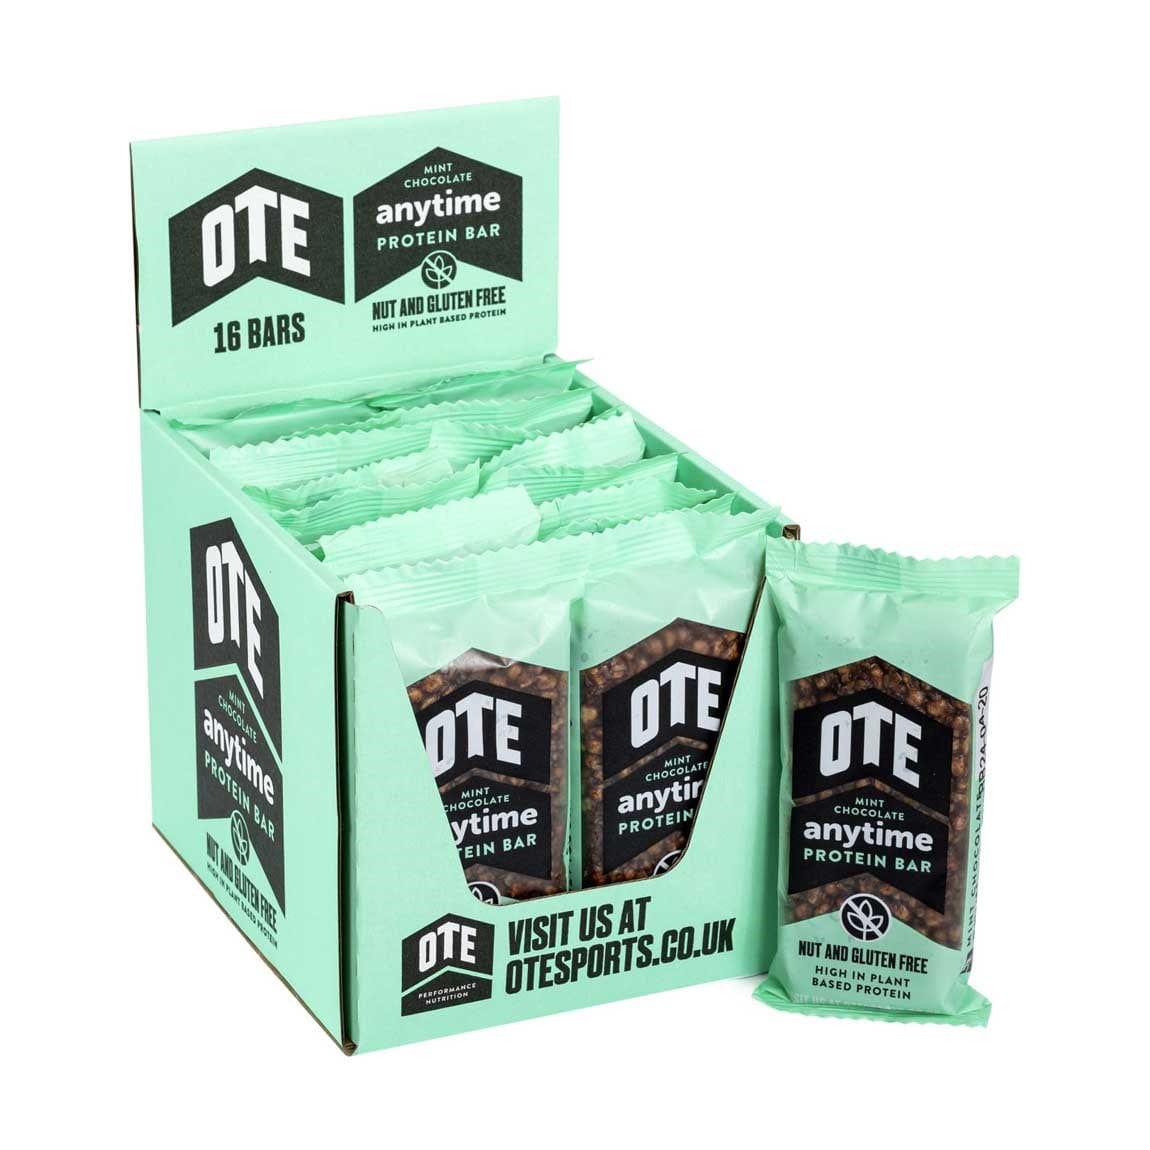 OTE Energy Bars Box of 16 / Mint Chocolate Anytime Protein Bar XMiles